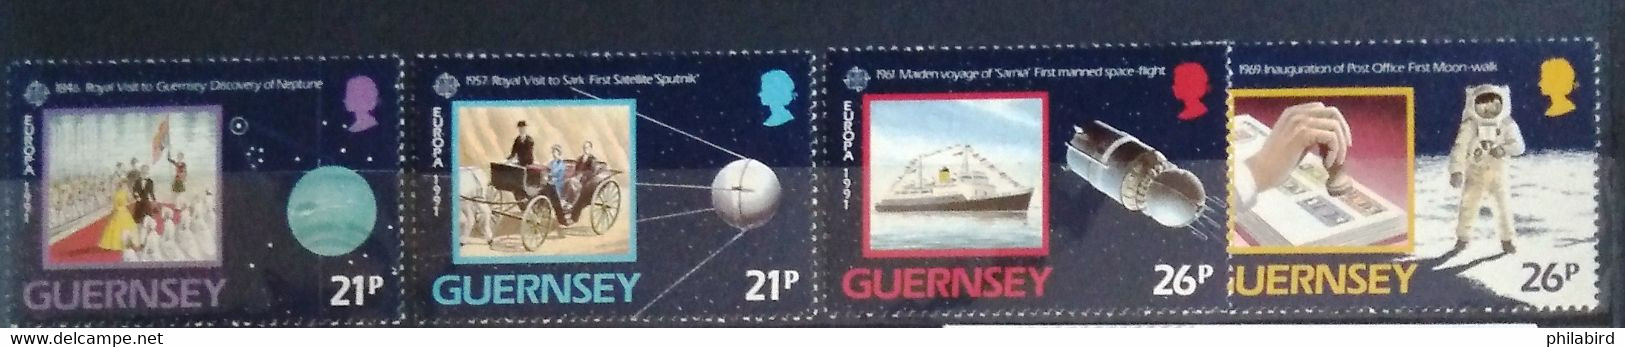 EUROPA 1991 - GUERNESEY                   N° 520/523                       NEUF** - 1991